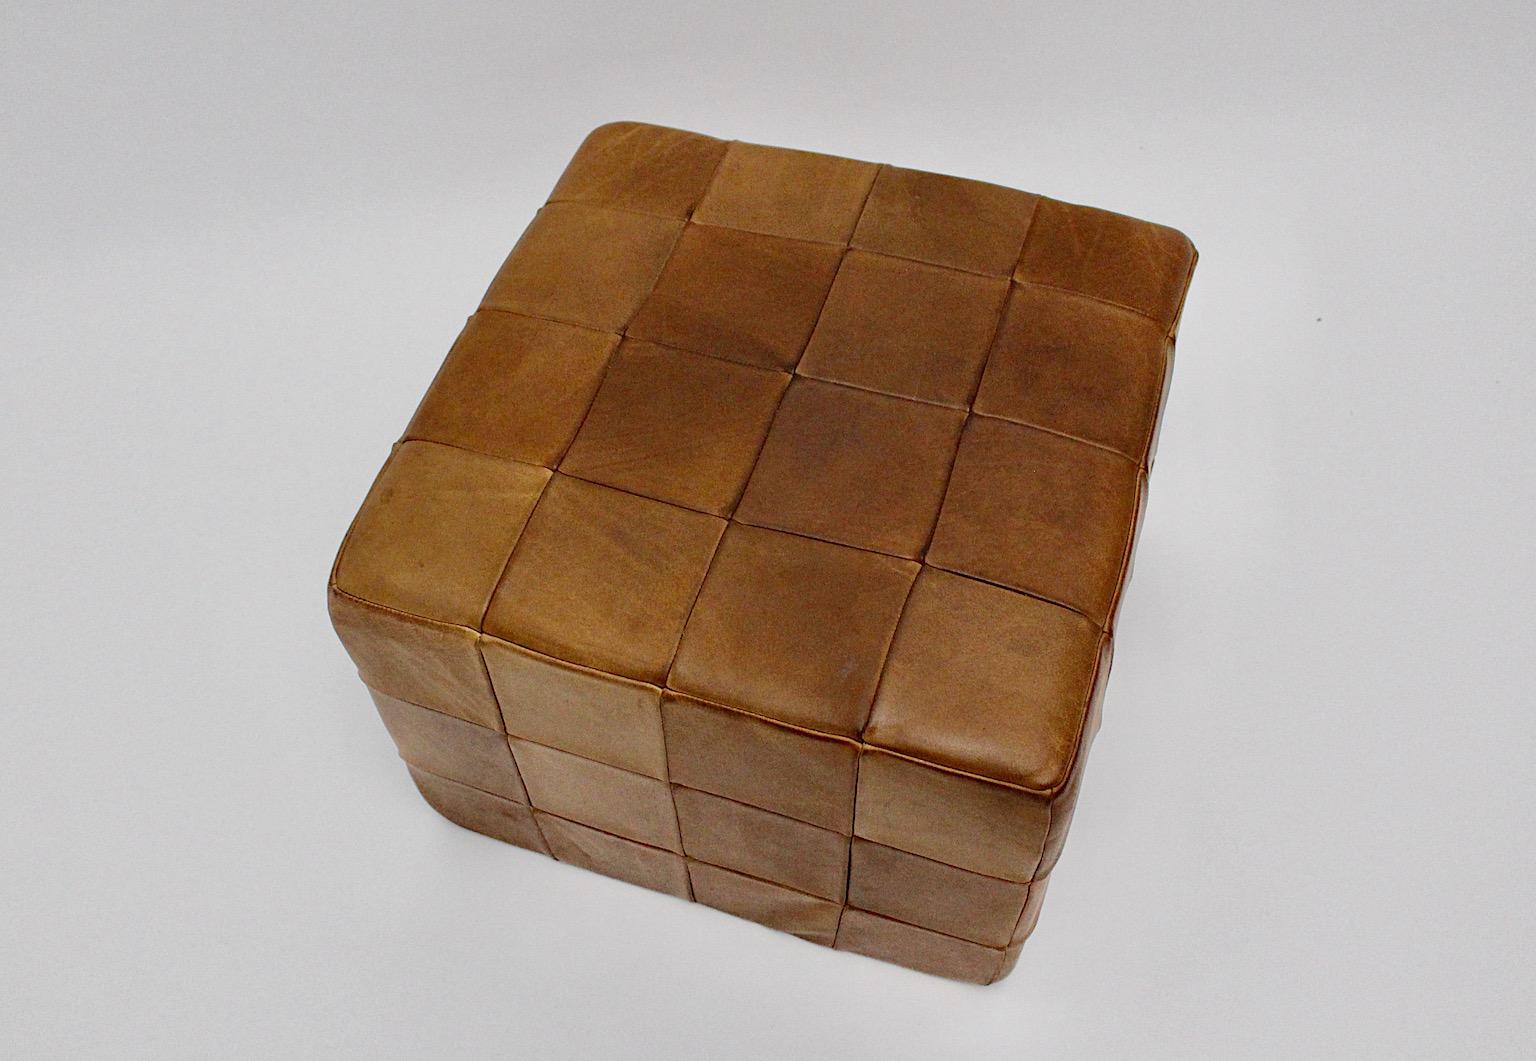 Late 20th Century Modernist Organic Vintage Brown Patchwork Leather Cubus Stool DeSede 1970s For Sale